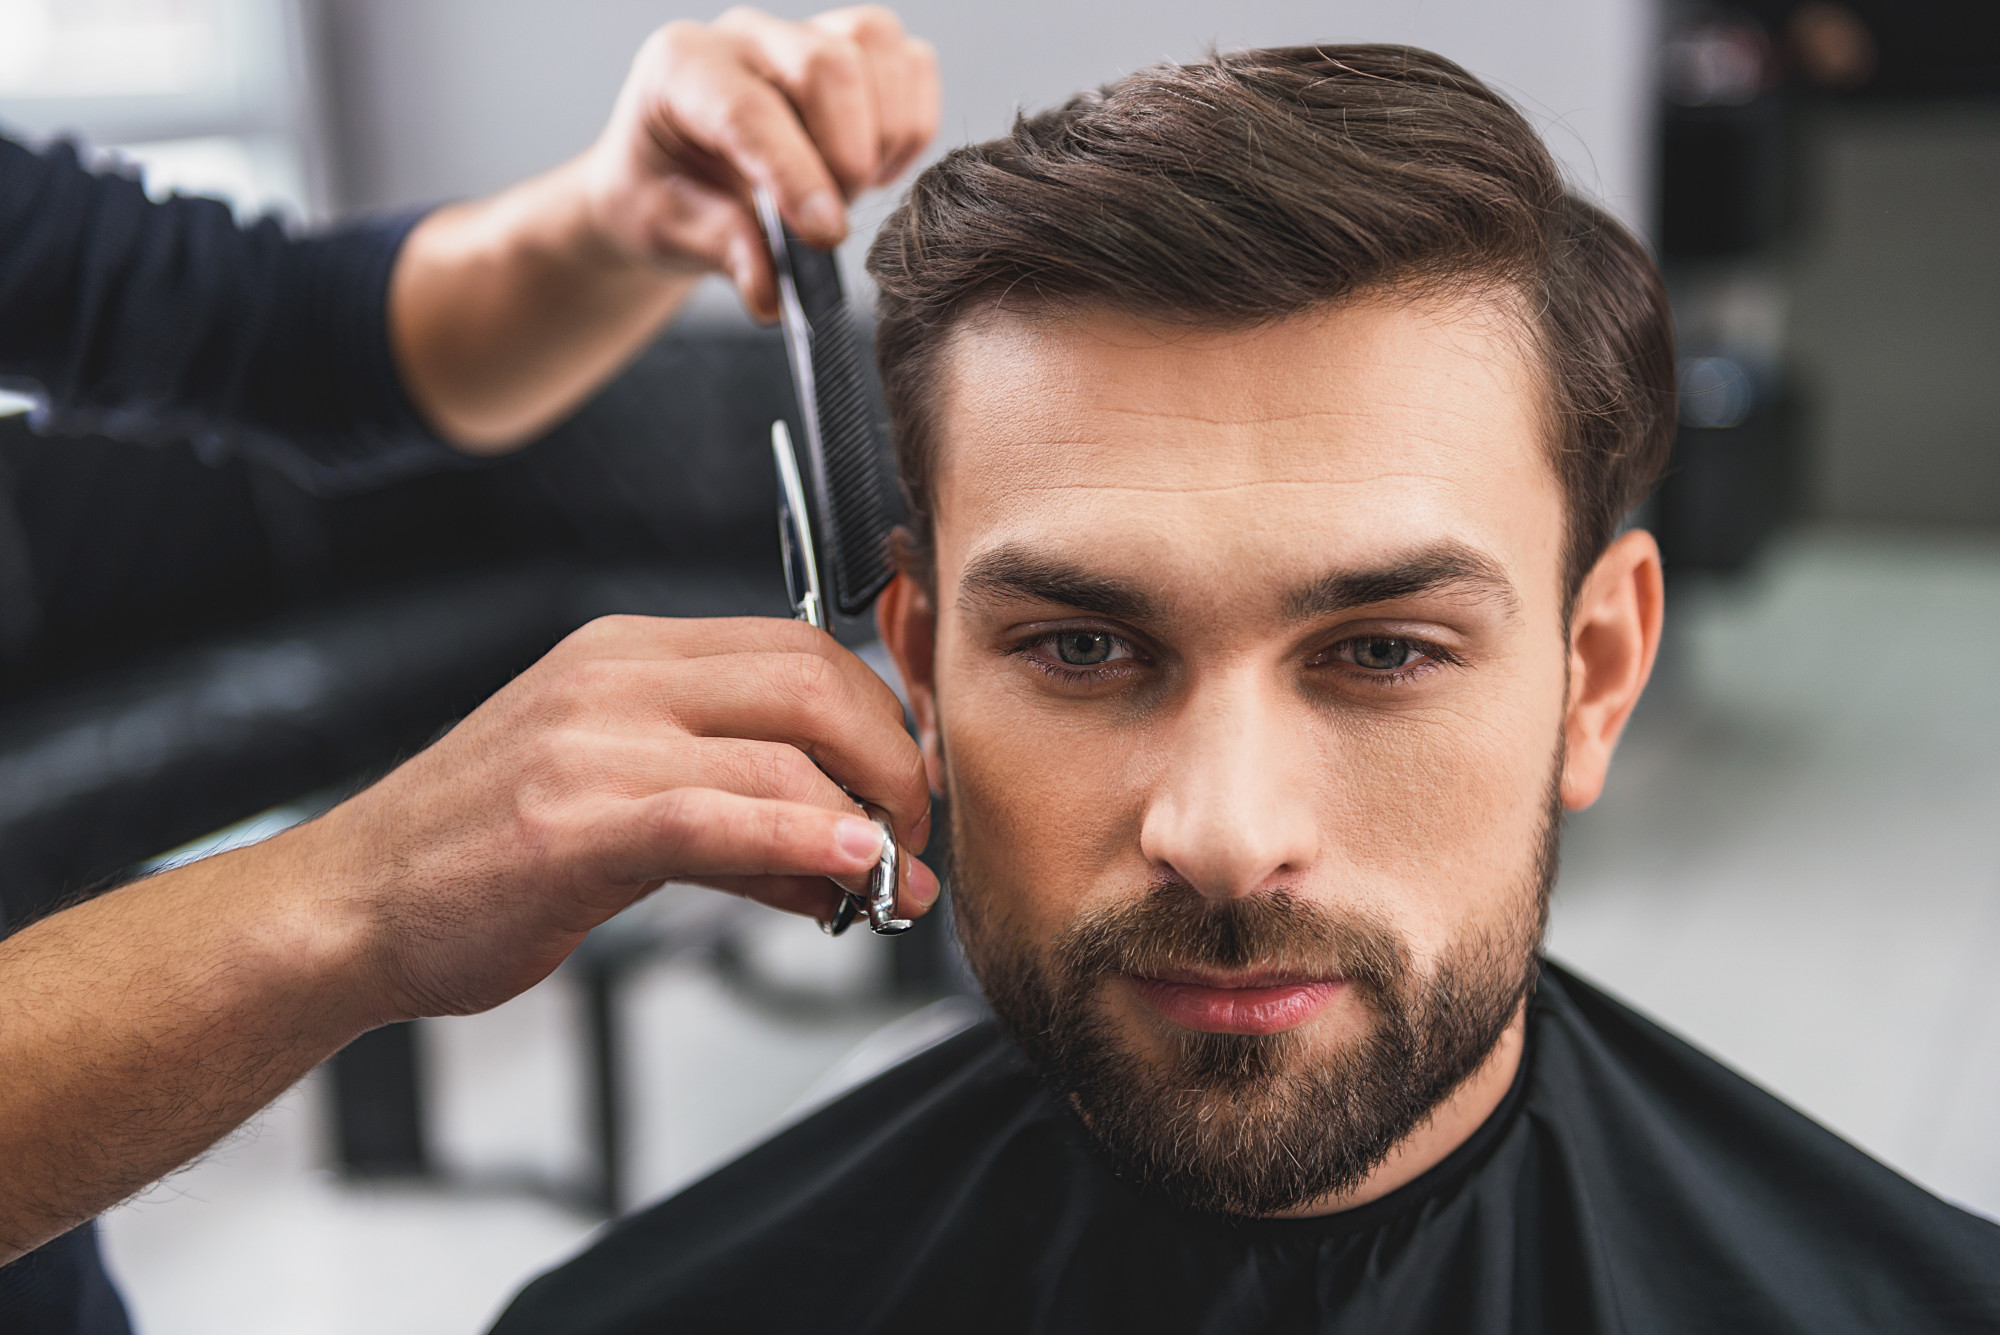 Top 5 Signs You Need a New Haircut